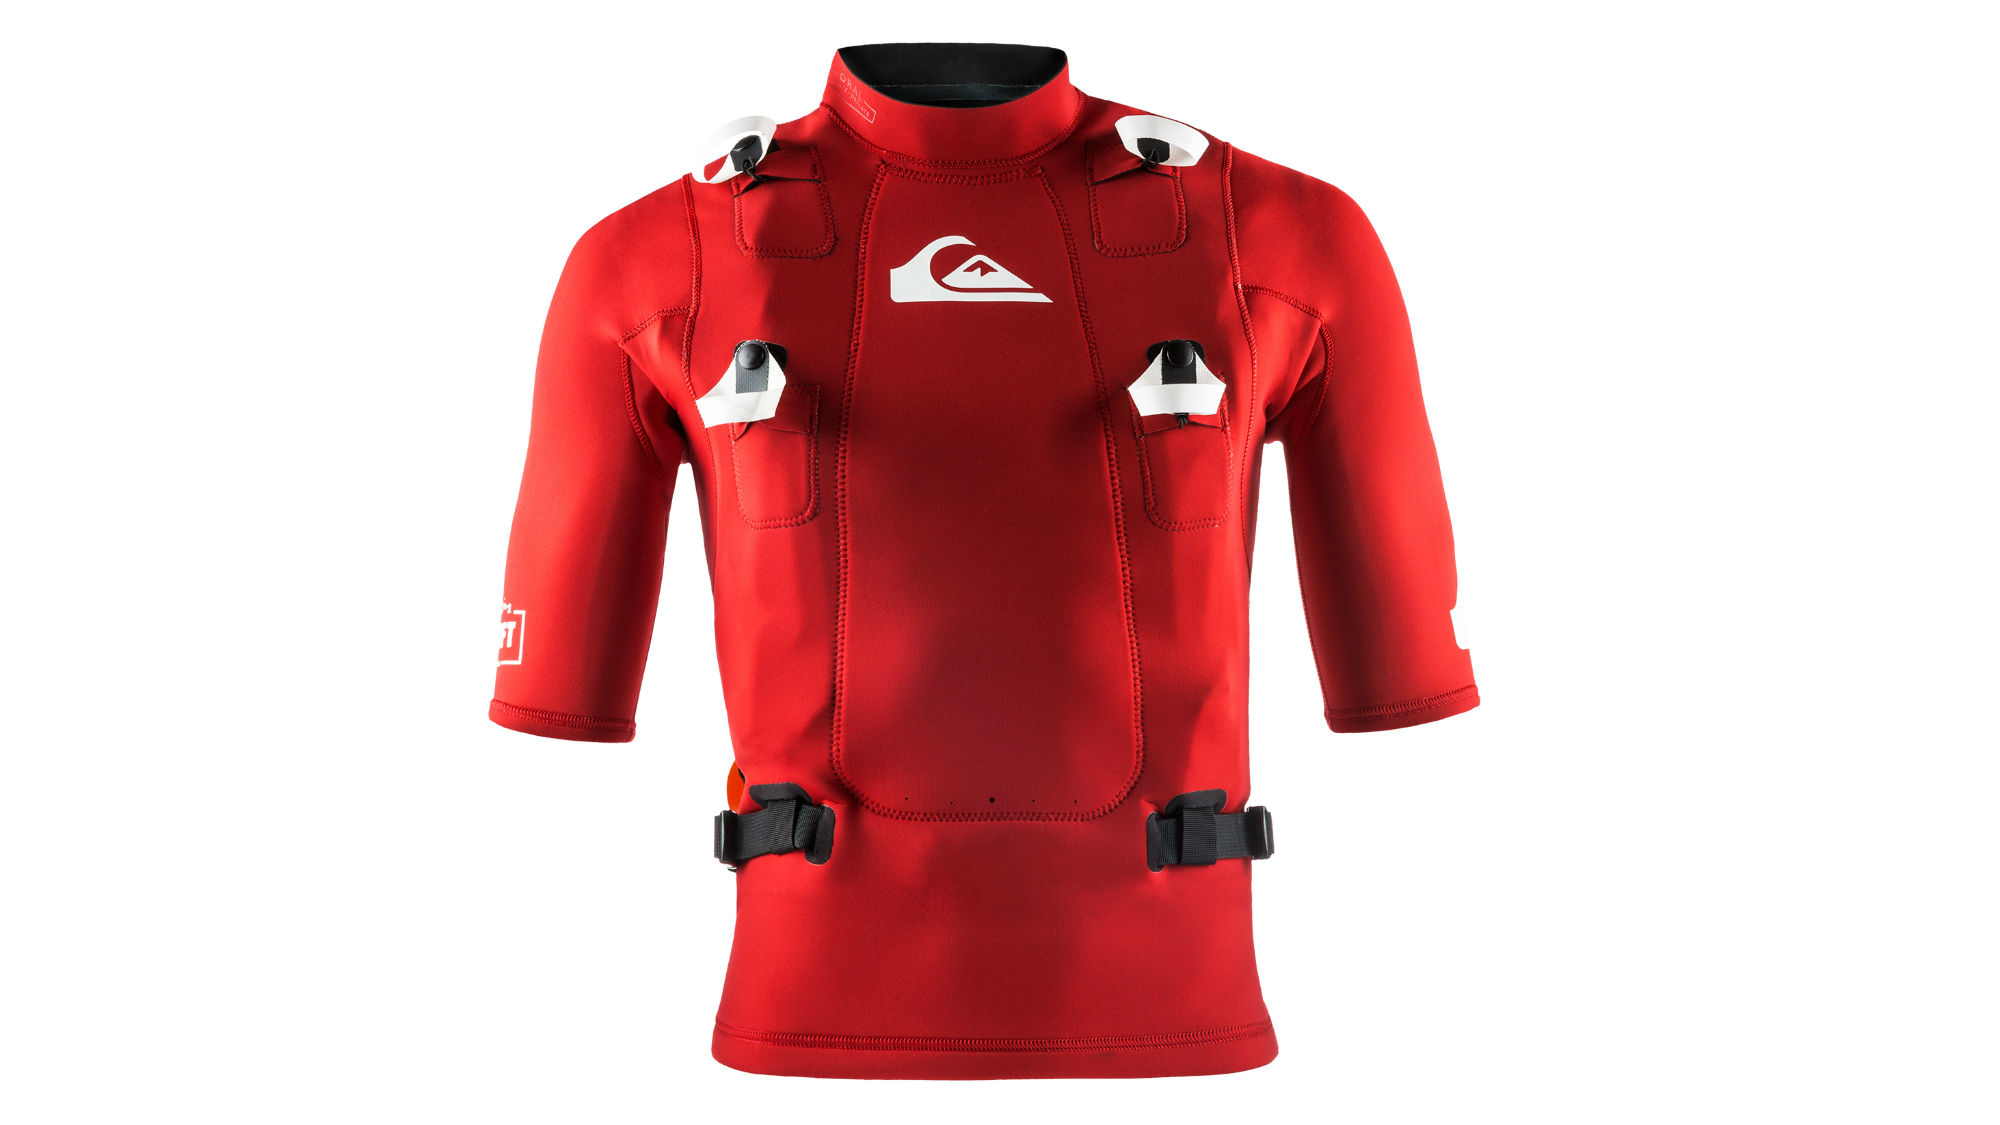 Quiksilver\'s New Airlift Will The Vest Surfing a Little Make Manual Safer Big-Wave 